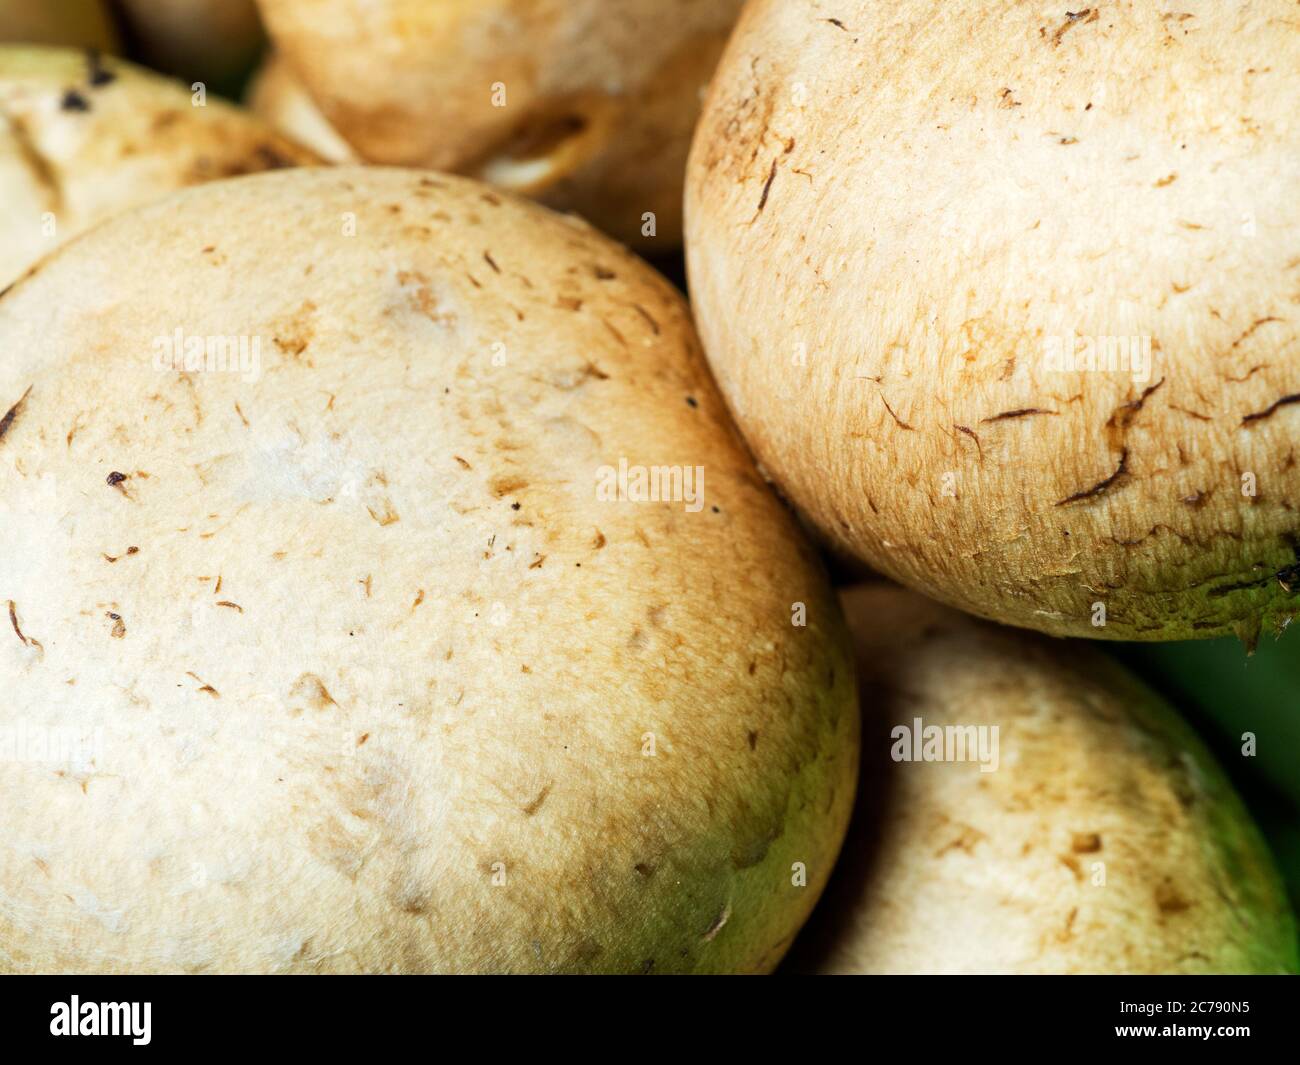 Punnet of chestnut mushrooms from a supermarket Stock Photo